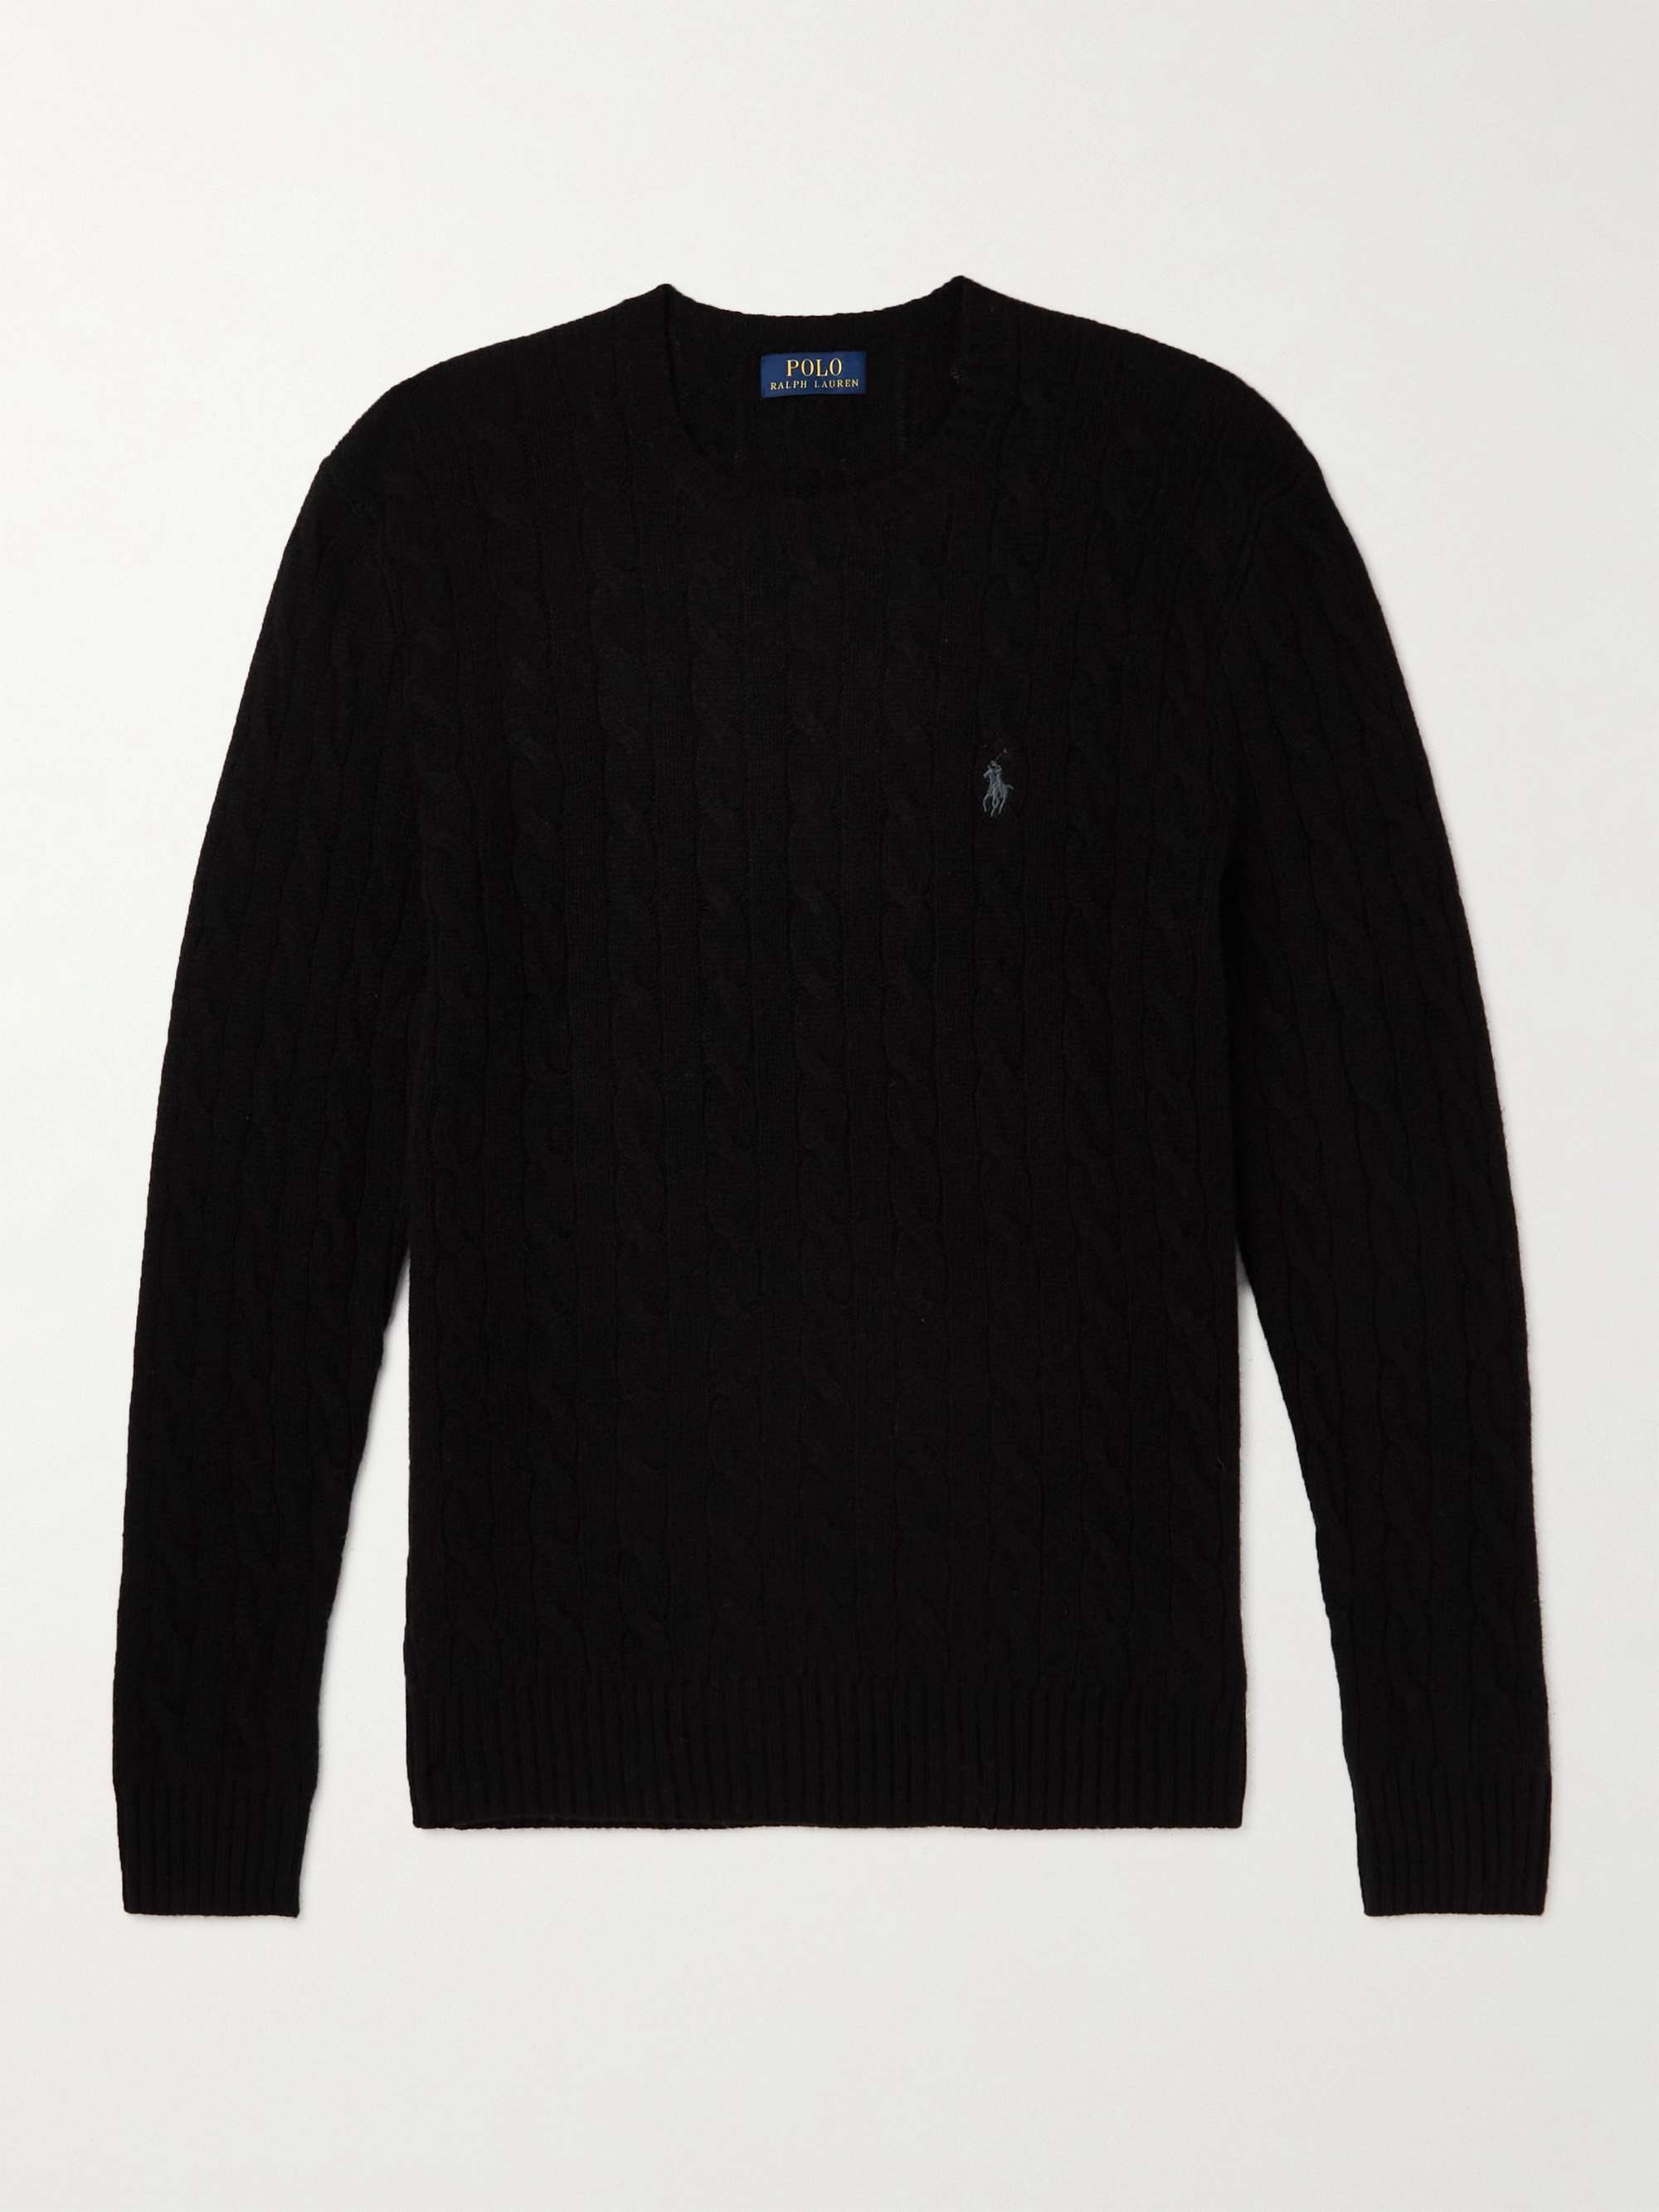 Black Cable-Knit Wool and Cashmere-Blend Sweater | POLO RALPH LAUREN | MR  PORTER